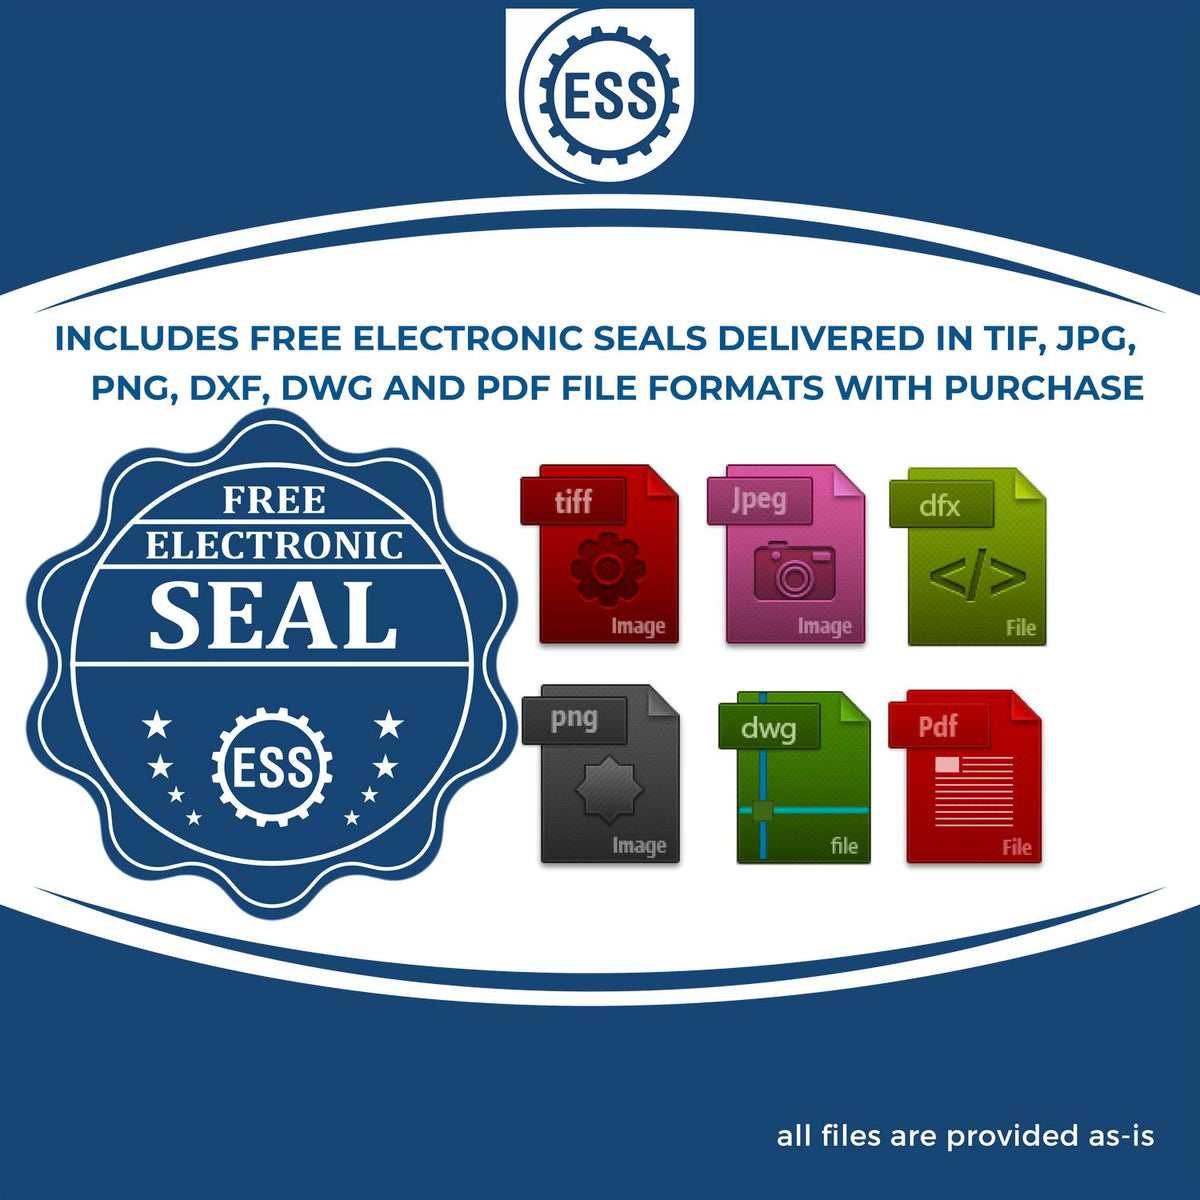 An infographic for the free electronic seal for the Gift Texas Geologist Seal illustrating the different file type icons such as DXF, DWG, TIF, JPG and PNG.